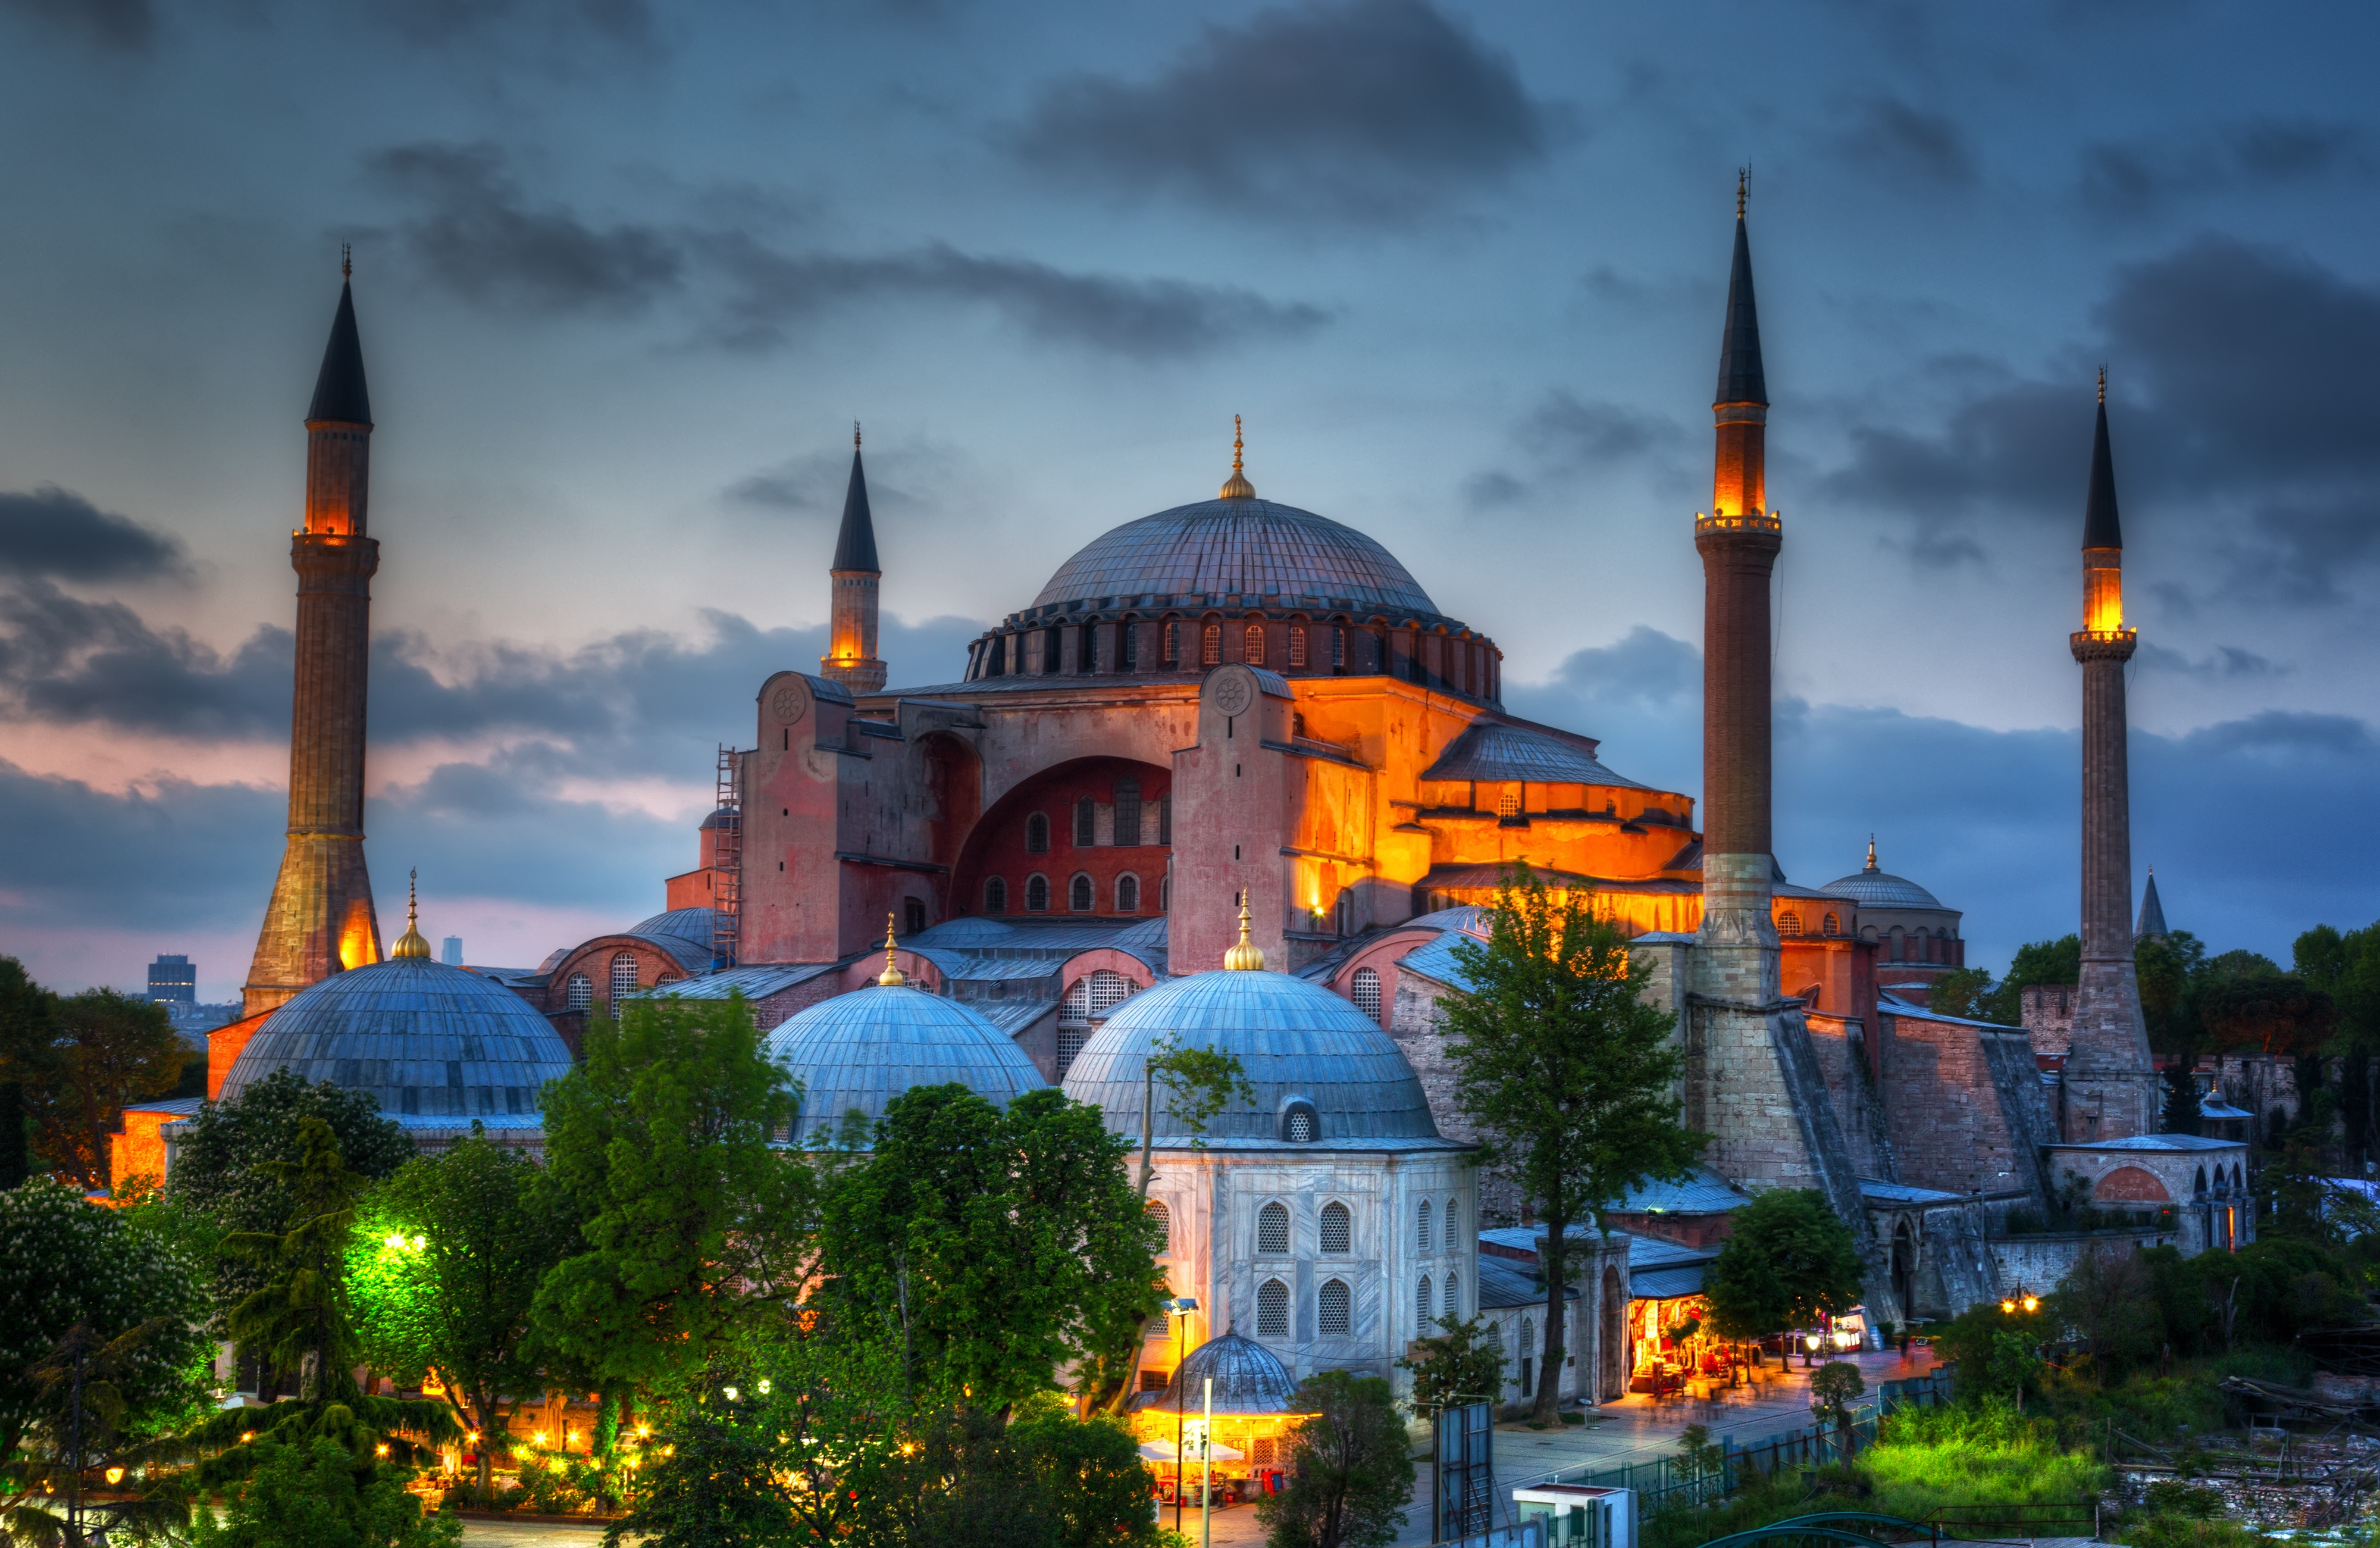 Hagia Sophia Museum - One of the Top Attractions in Istanbul, Turkey